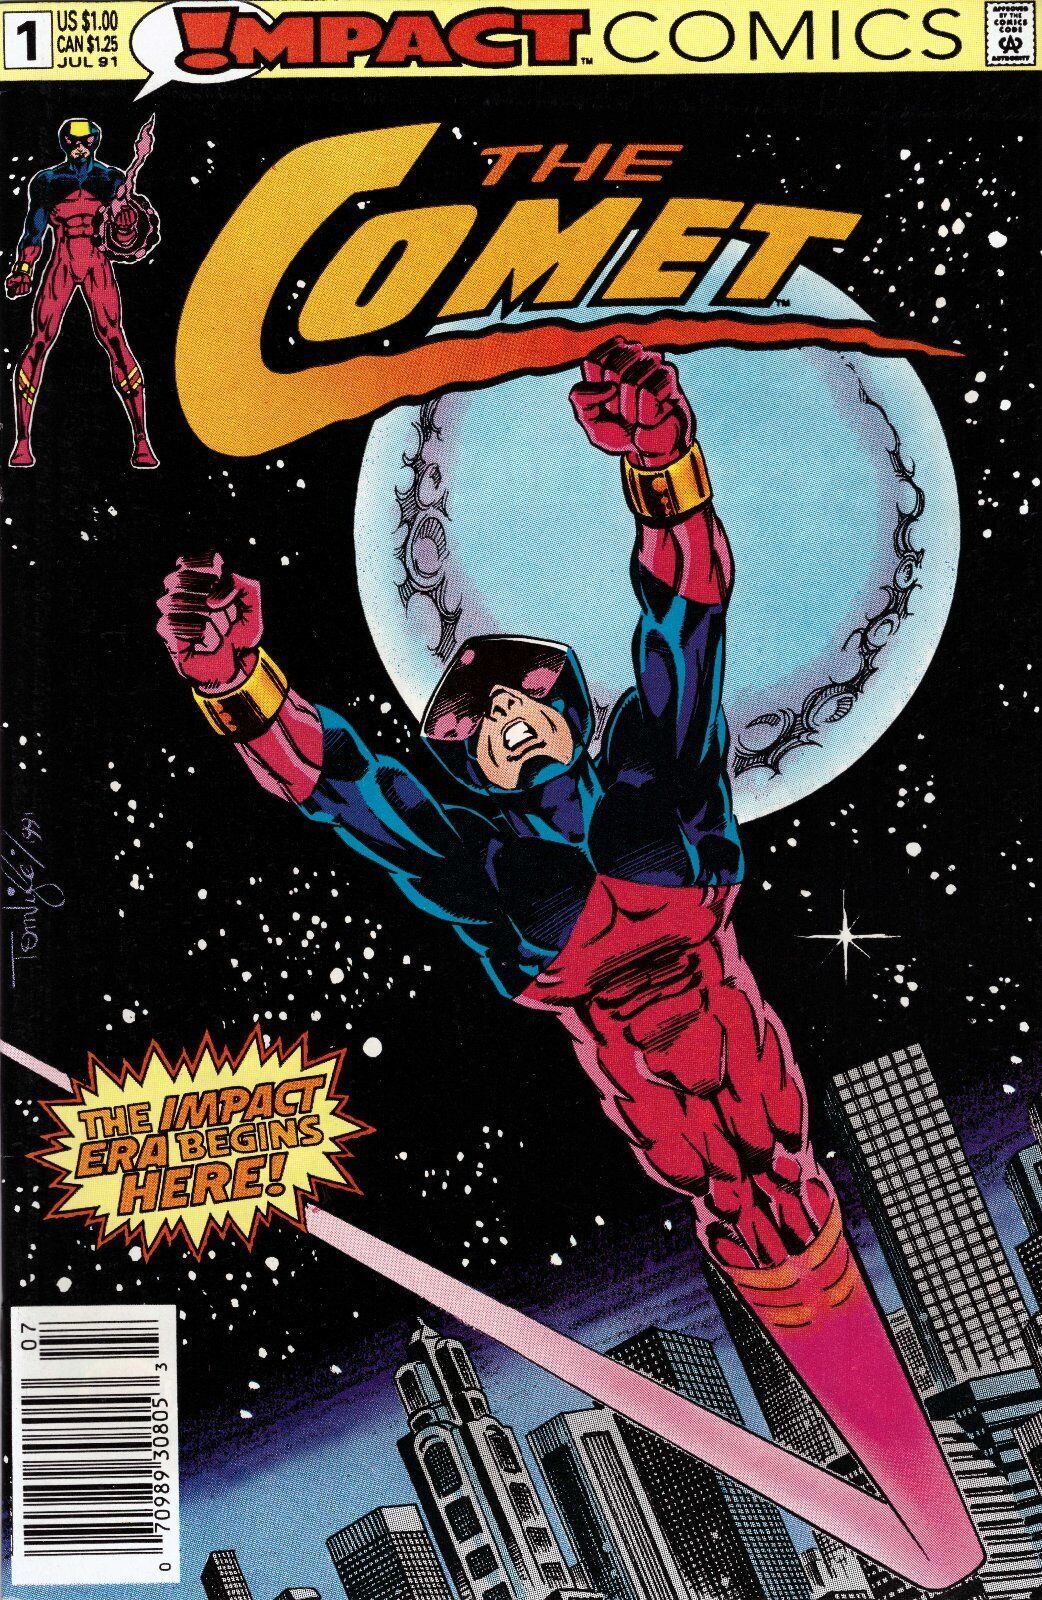 The Comet #1 Newsstand Cover (1991-1992) DC